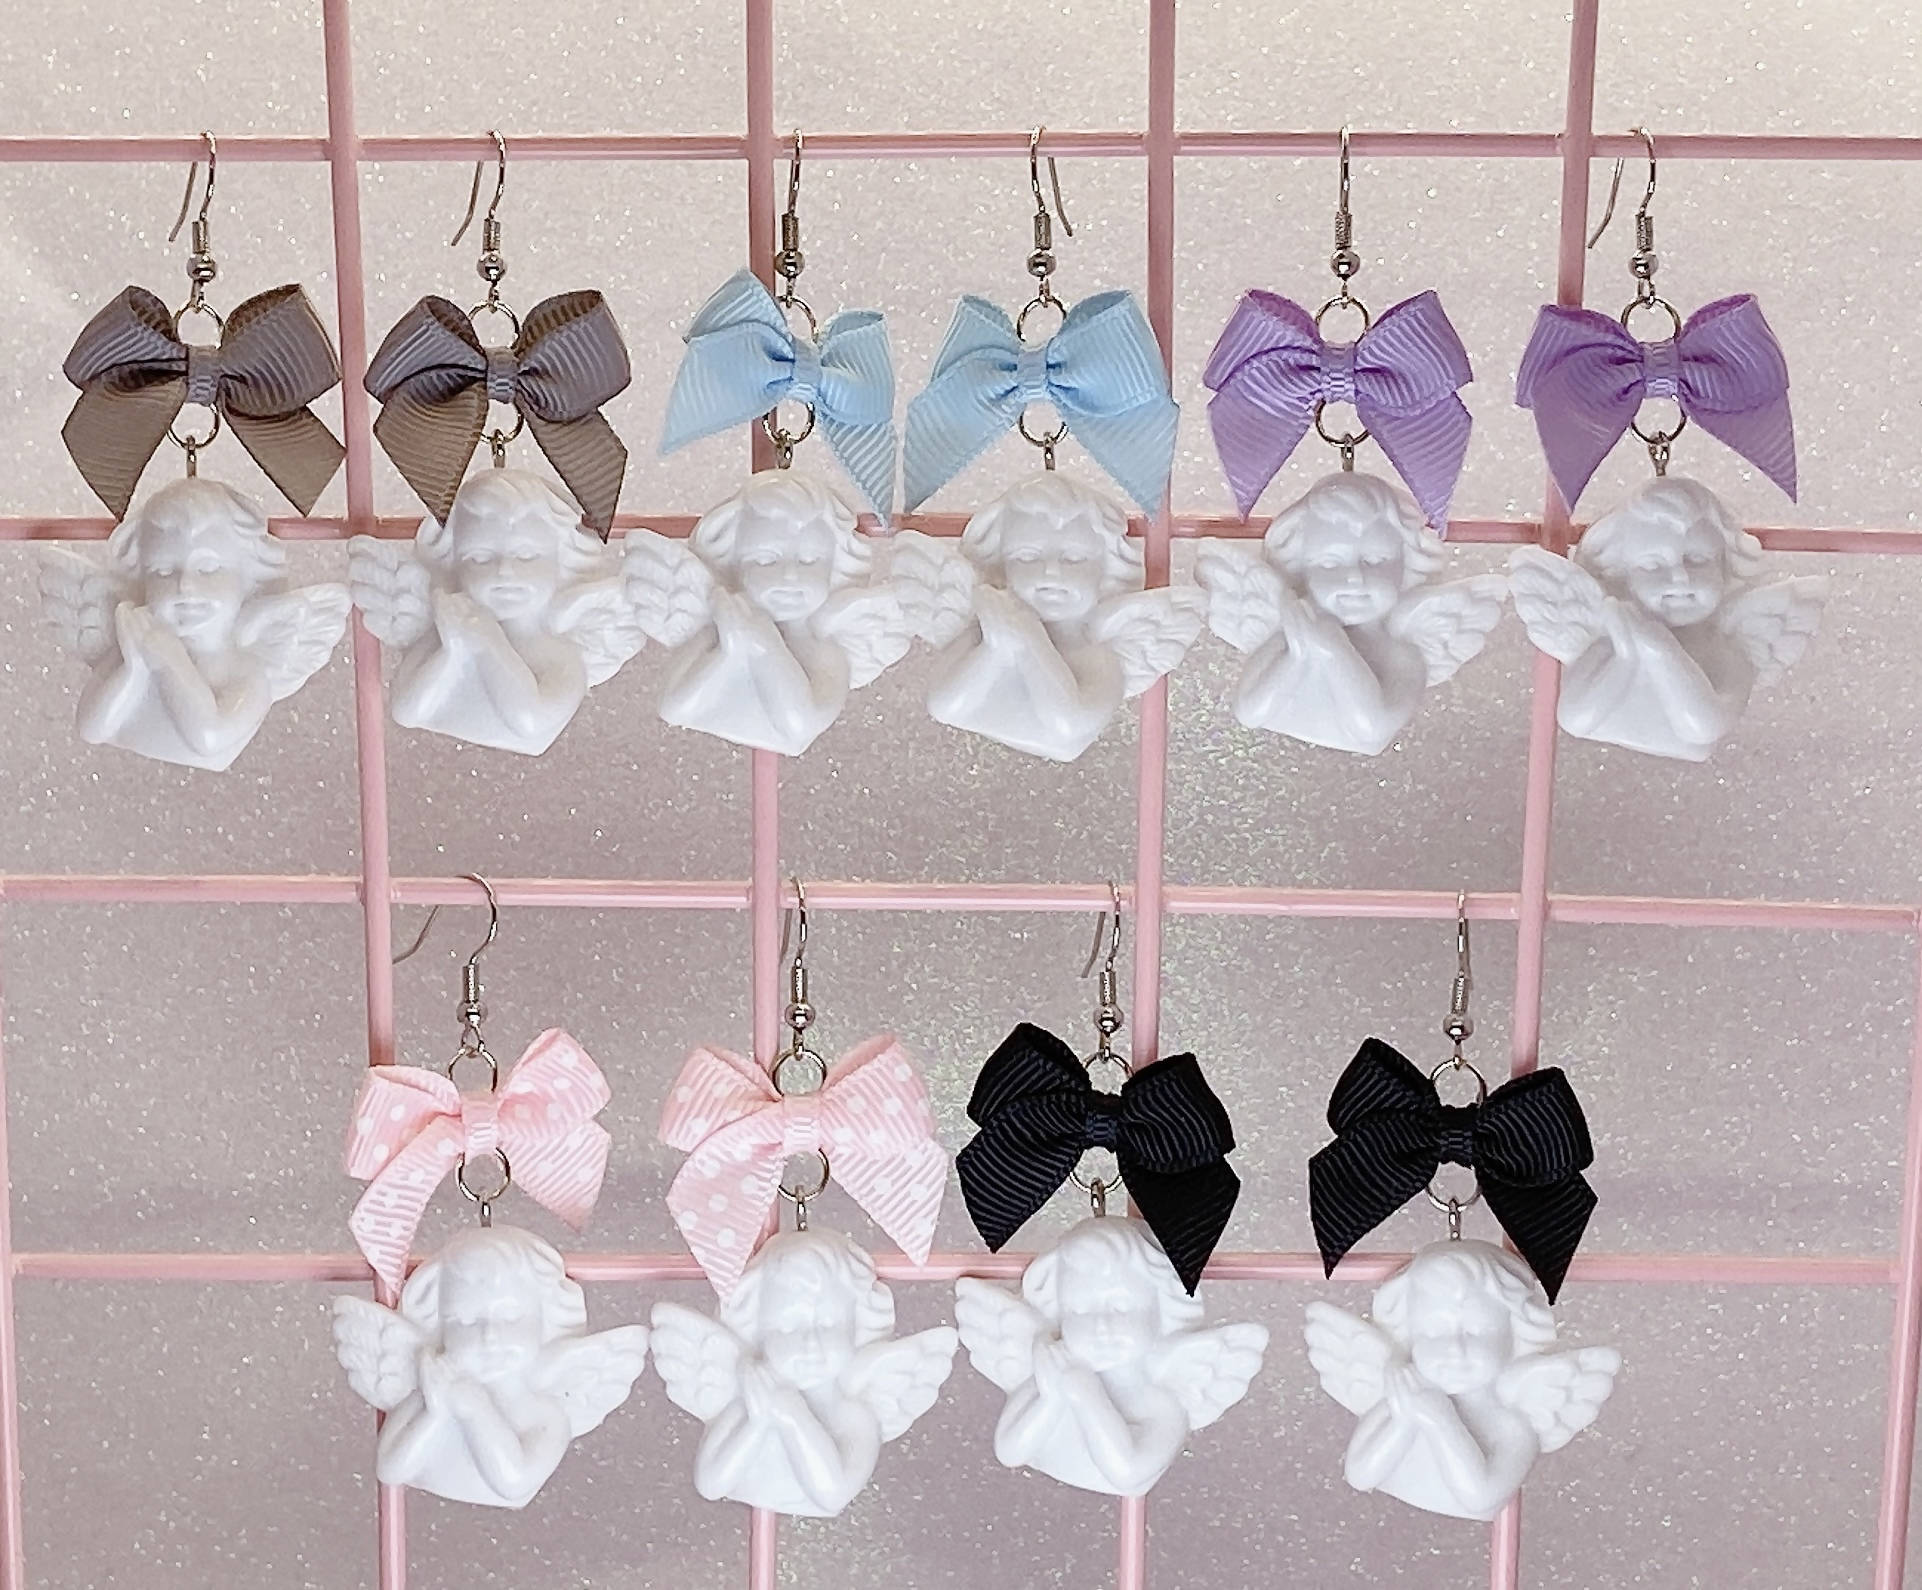 Angel Earrings (5 Colors) - Lolita Collective